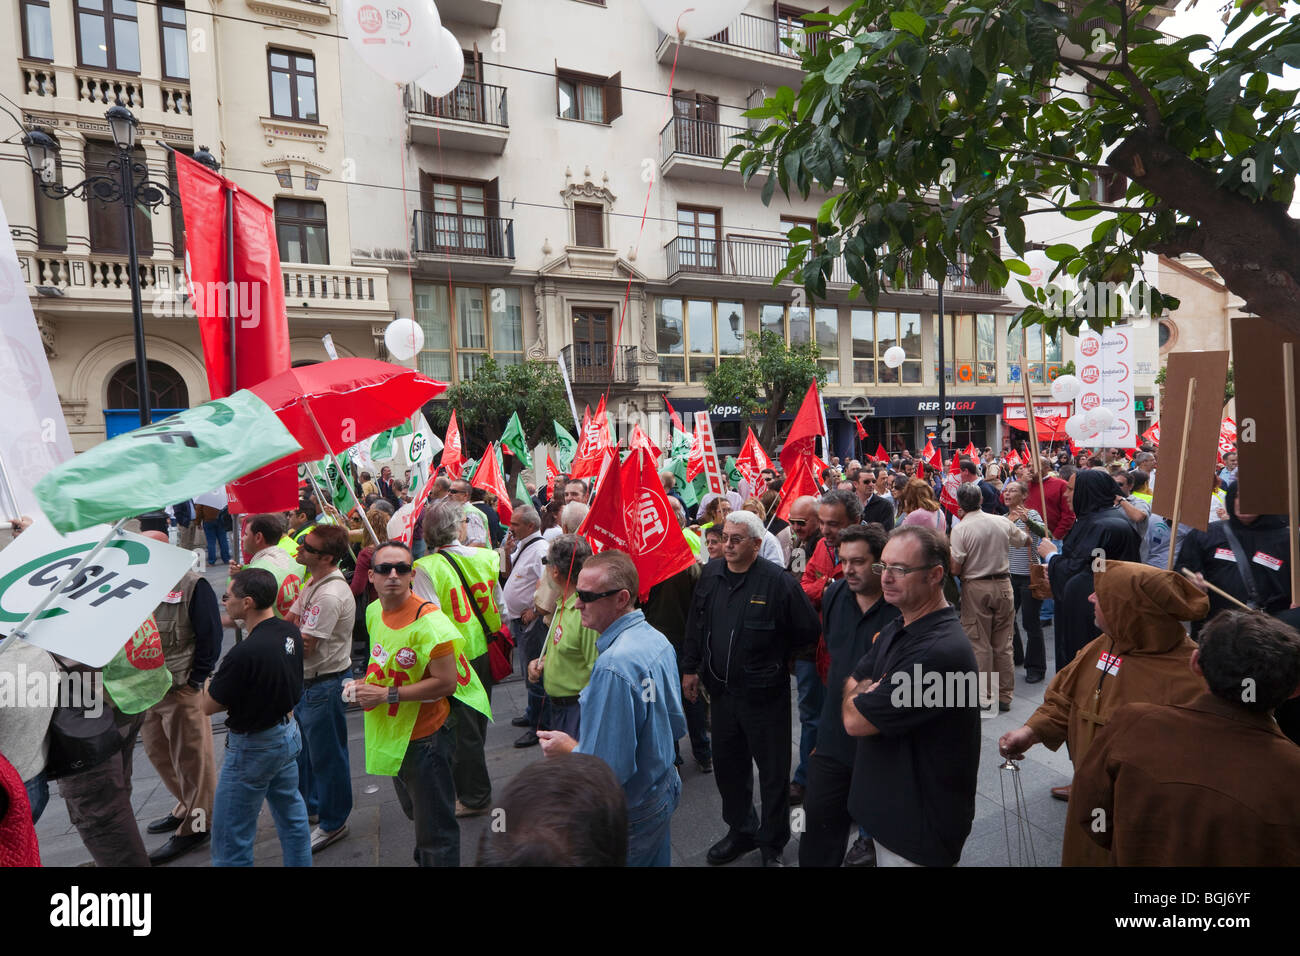 Trade unions march in Seville, Spain, protesting unemployment and asking for support for public jobs and less family businesses Stock Photo